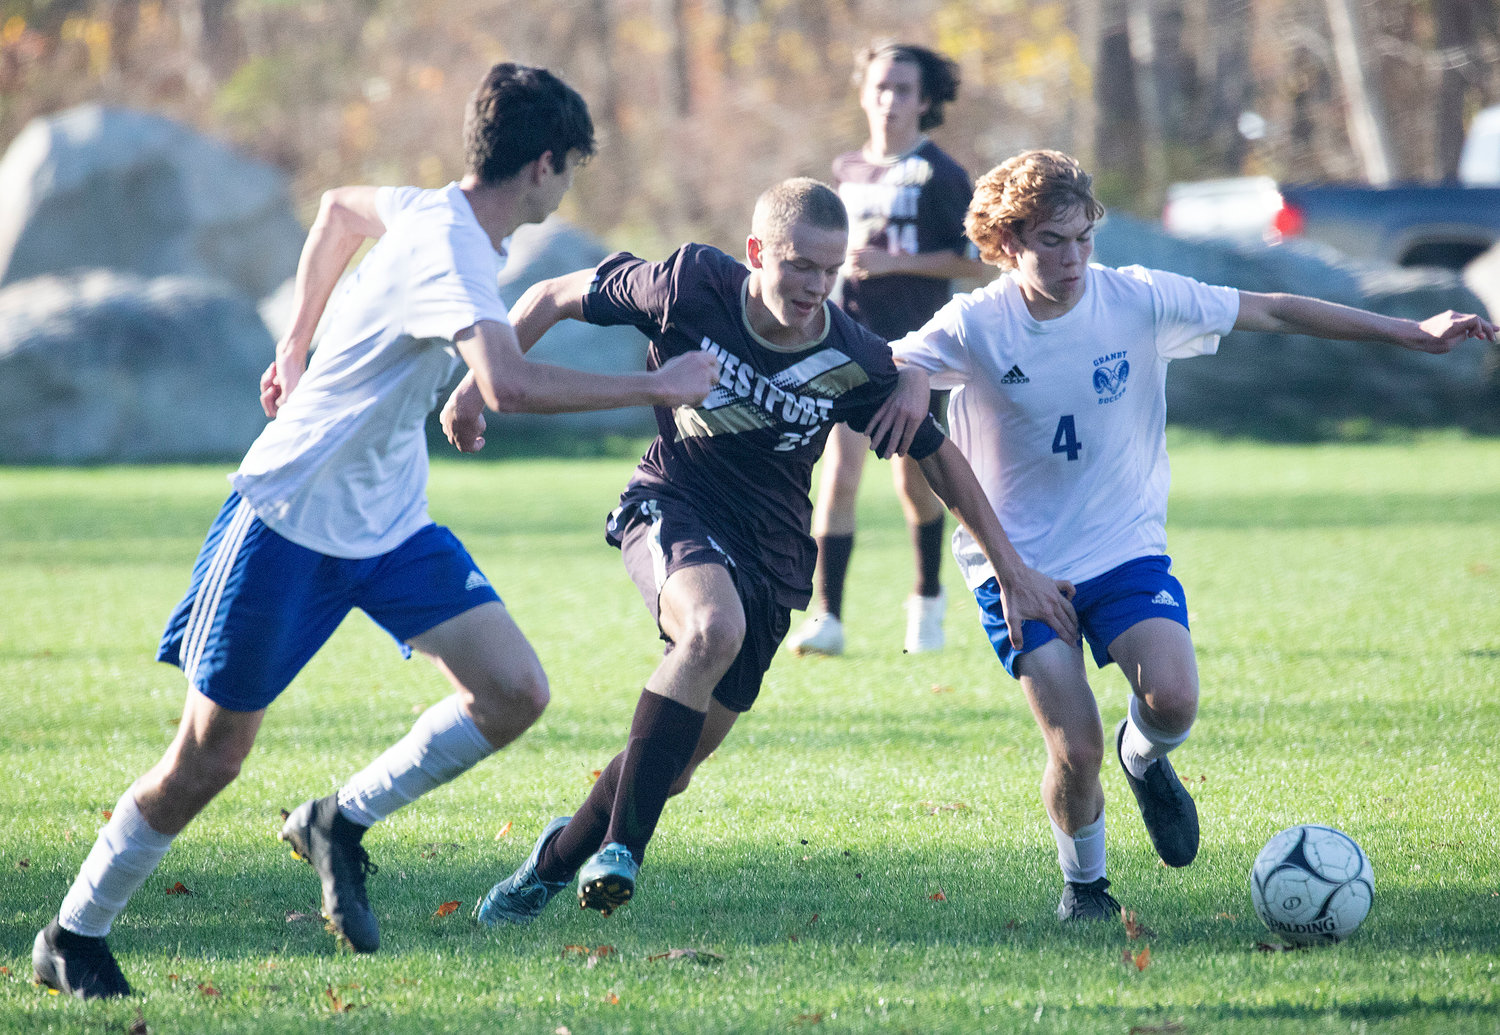 Central midfielder Coltrane McGonigle dribbles the ball upfield before making a pass in the first half. The fearless senior controlled the middle of the field both offensively and defensively.